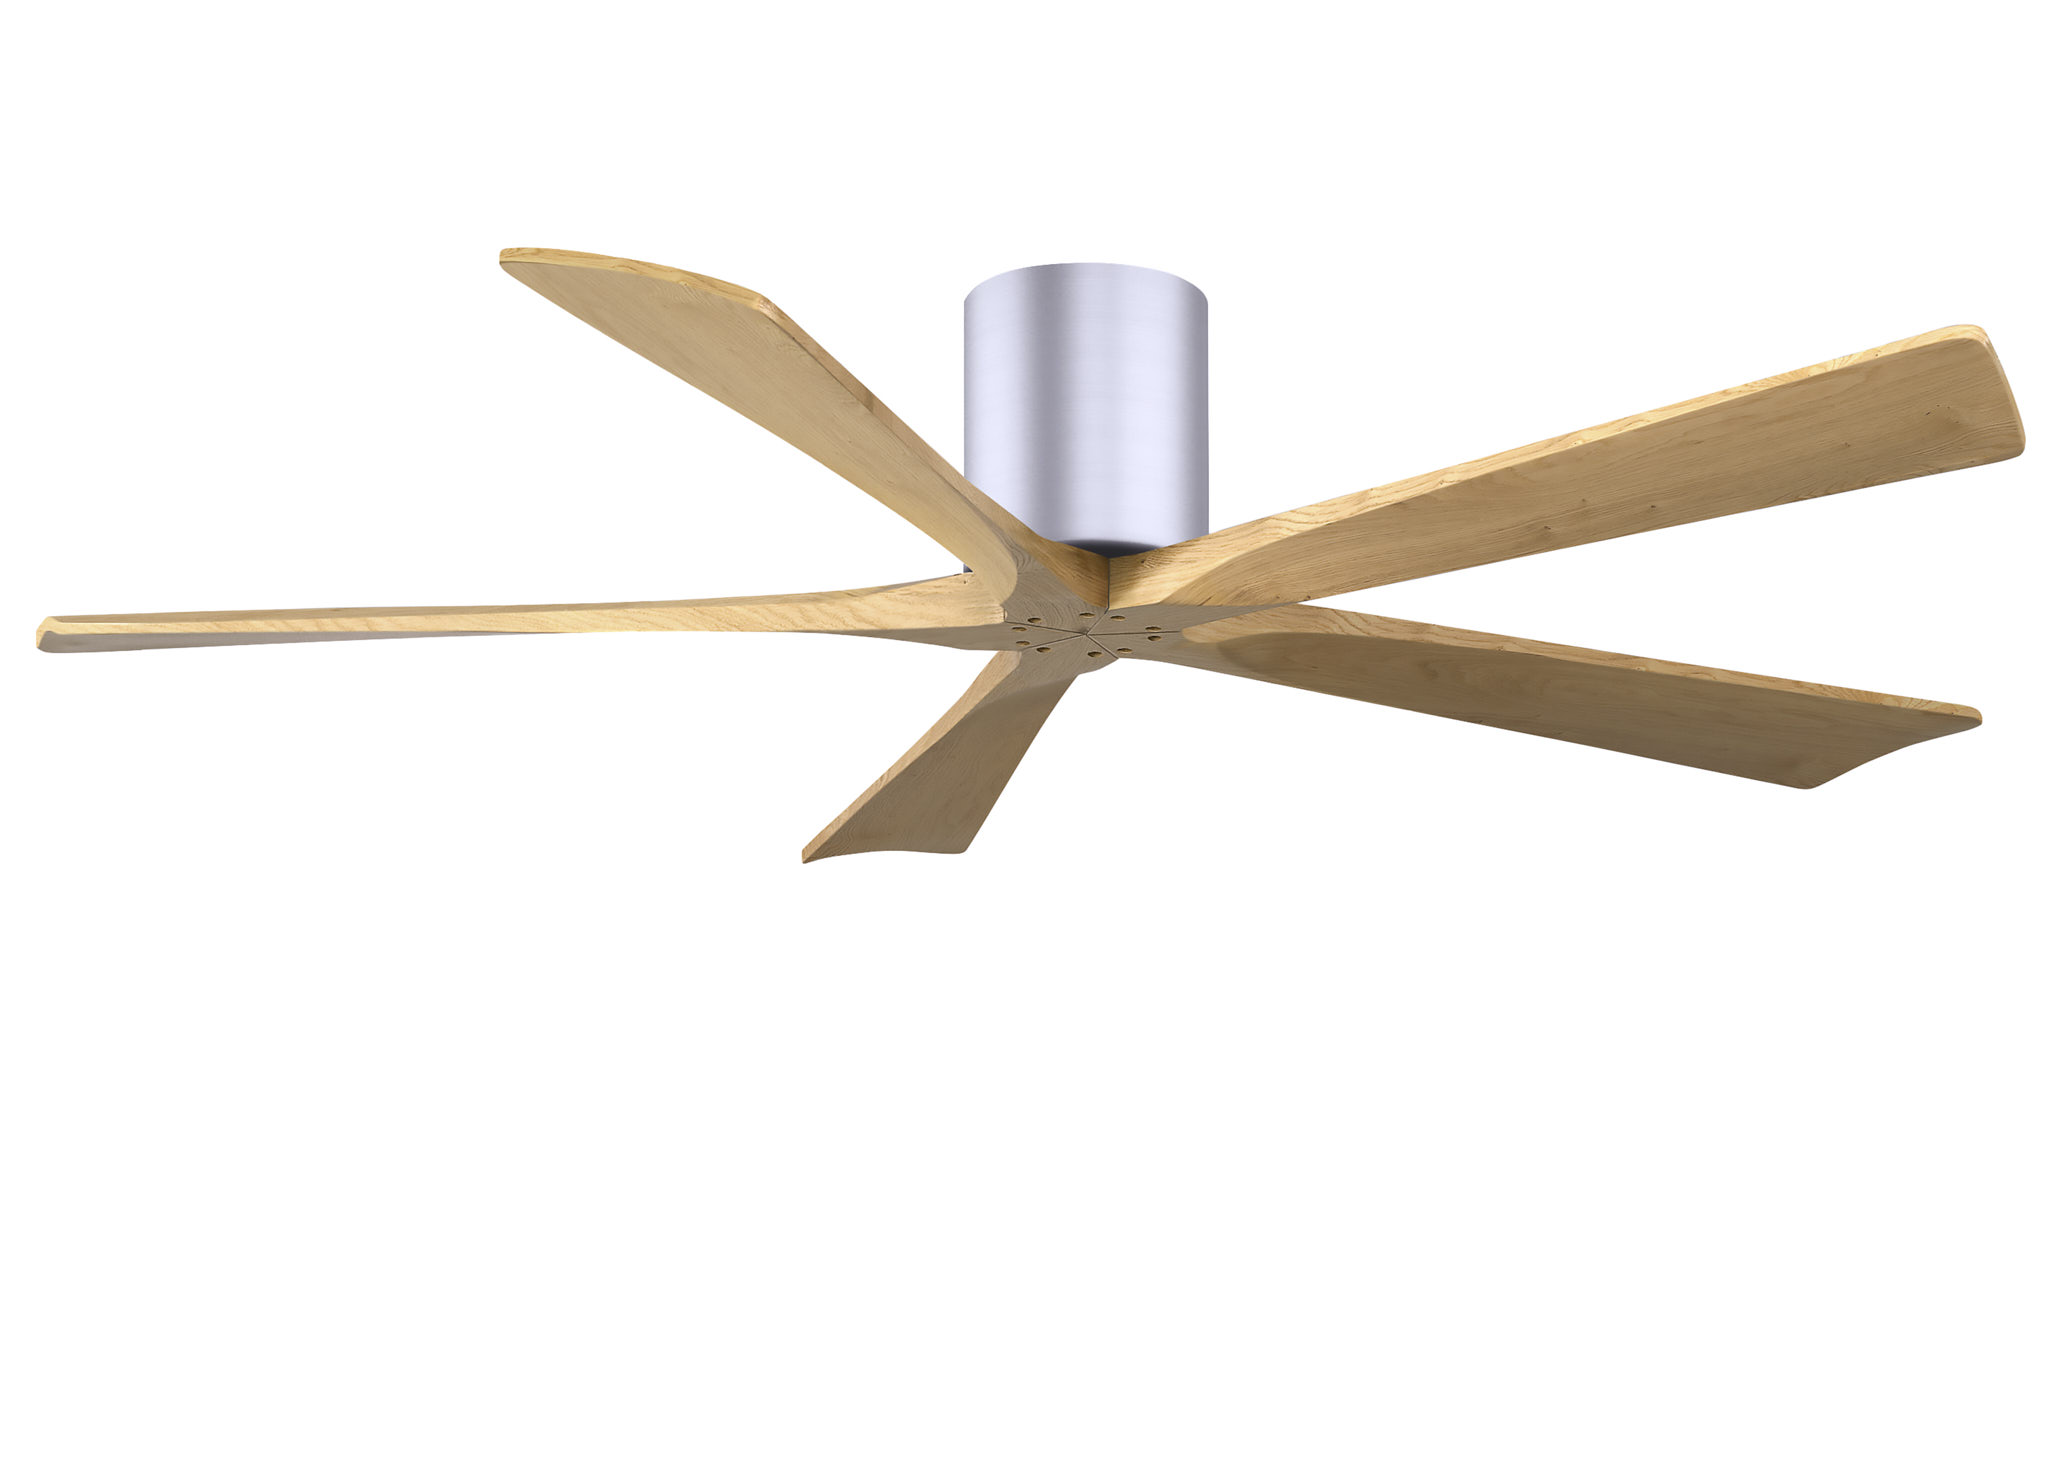 Irene-5H 6-speed ceiling fan in brushed nickel finish with 60